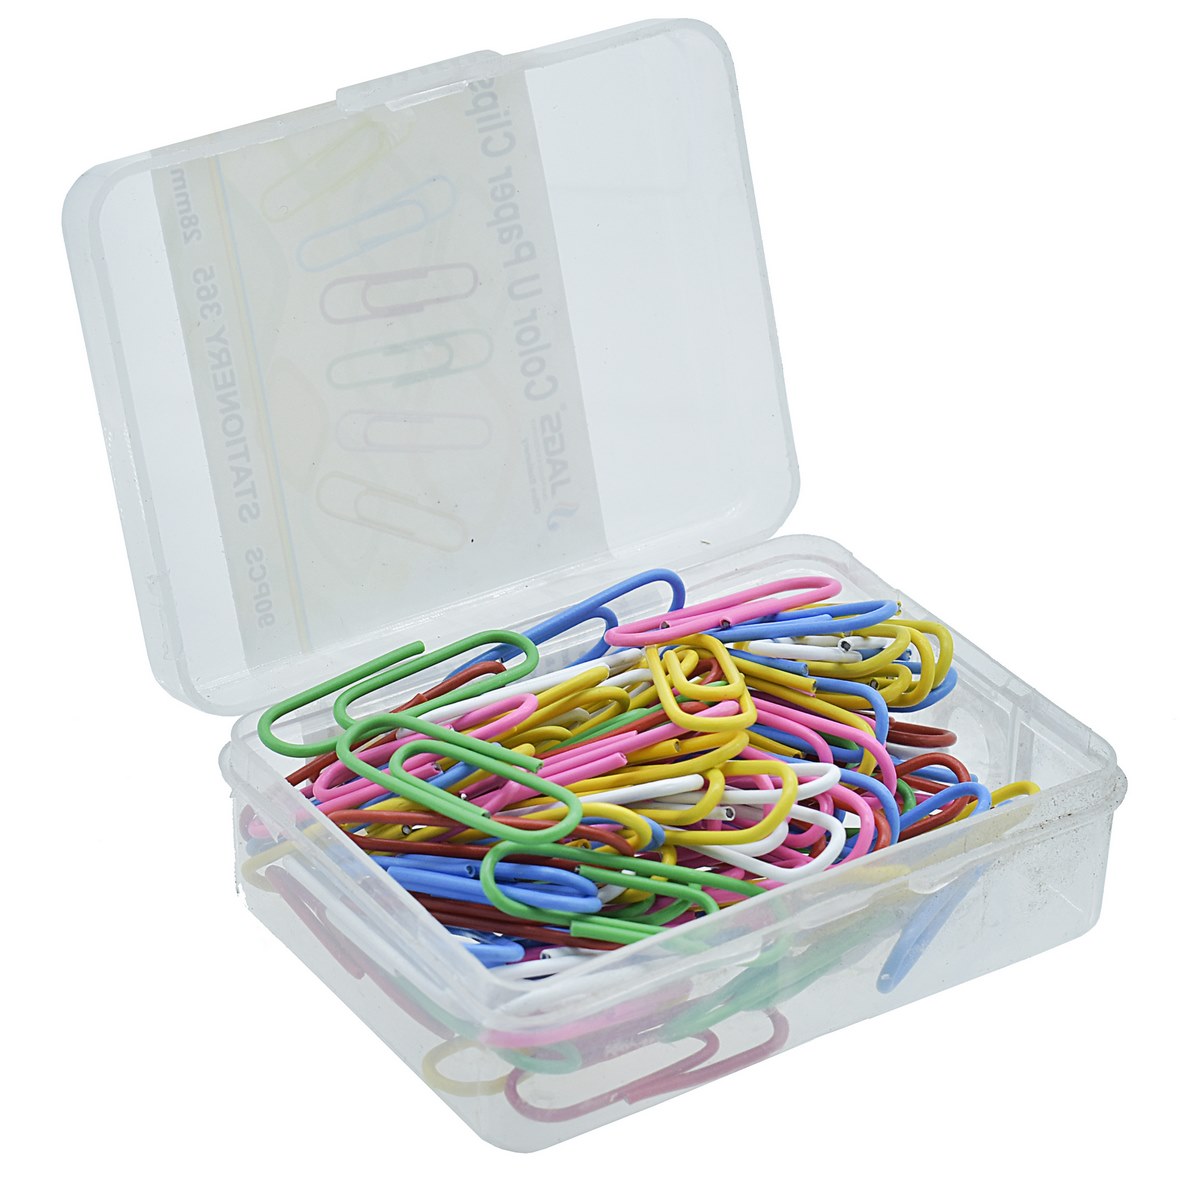 jags-mumbai Clip Colorful Assorted Paper Clips - 28MM, 40 Grams (CUPC28MM)